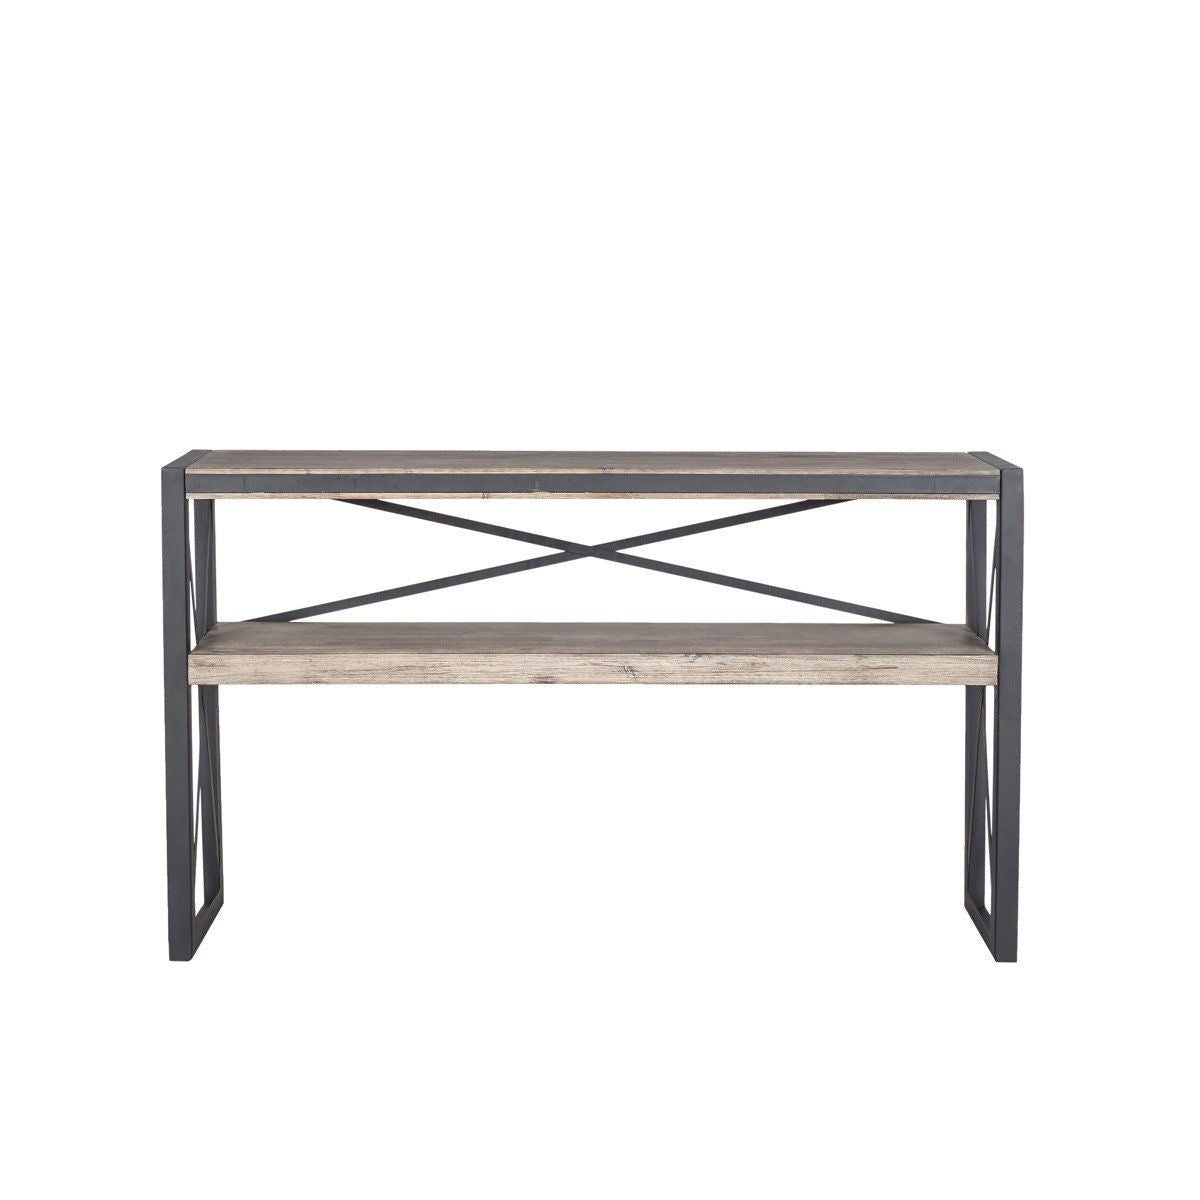 Bronx Console Table By Moes Home Collection Vx 1009 21